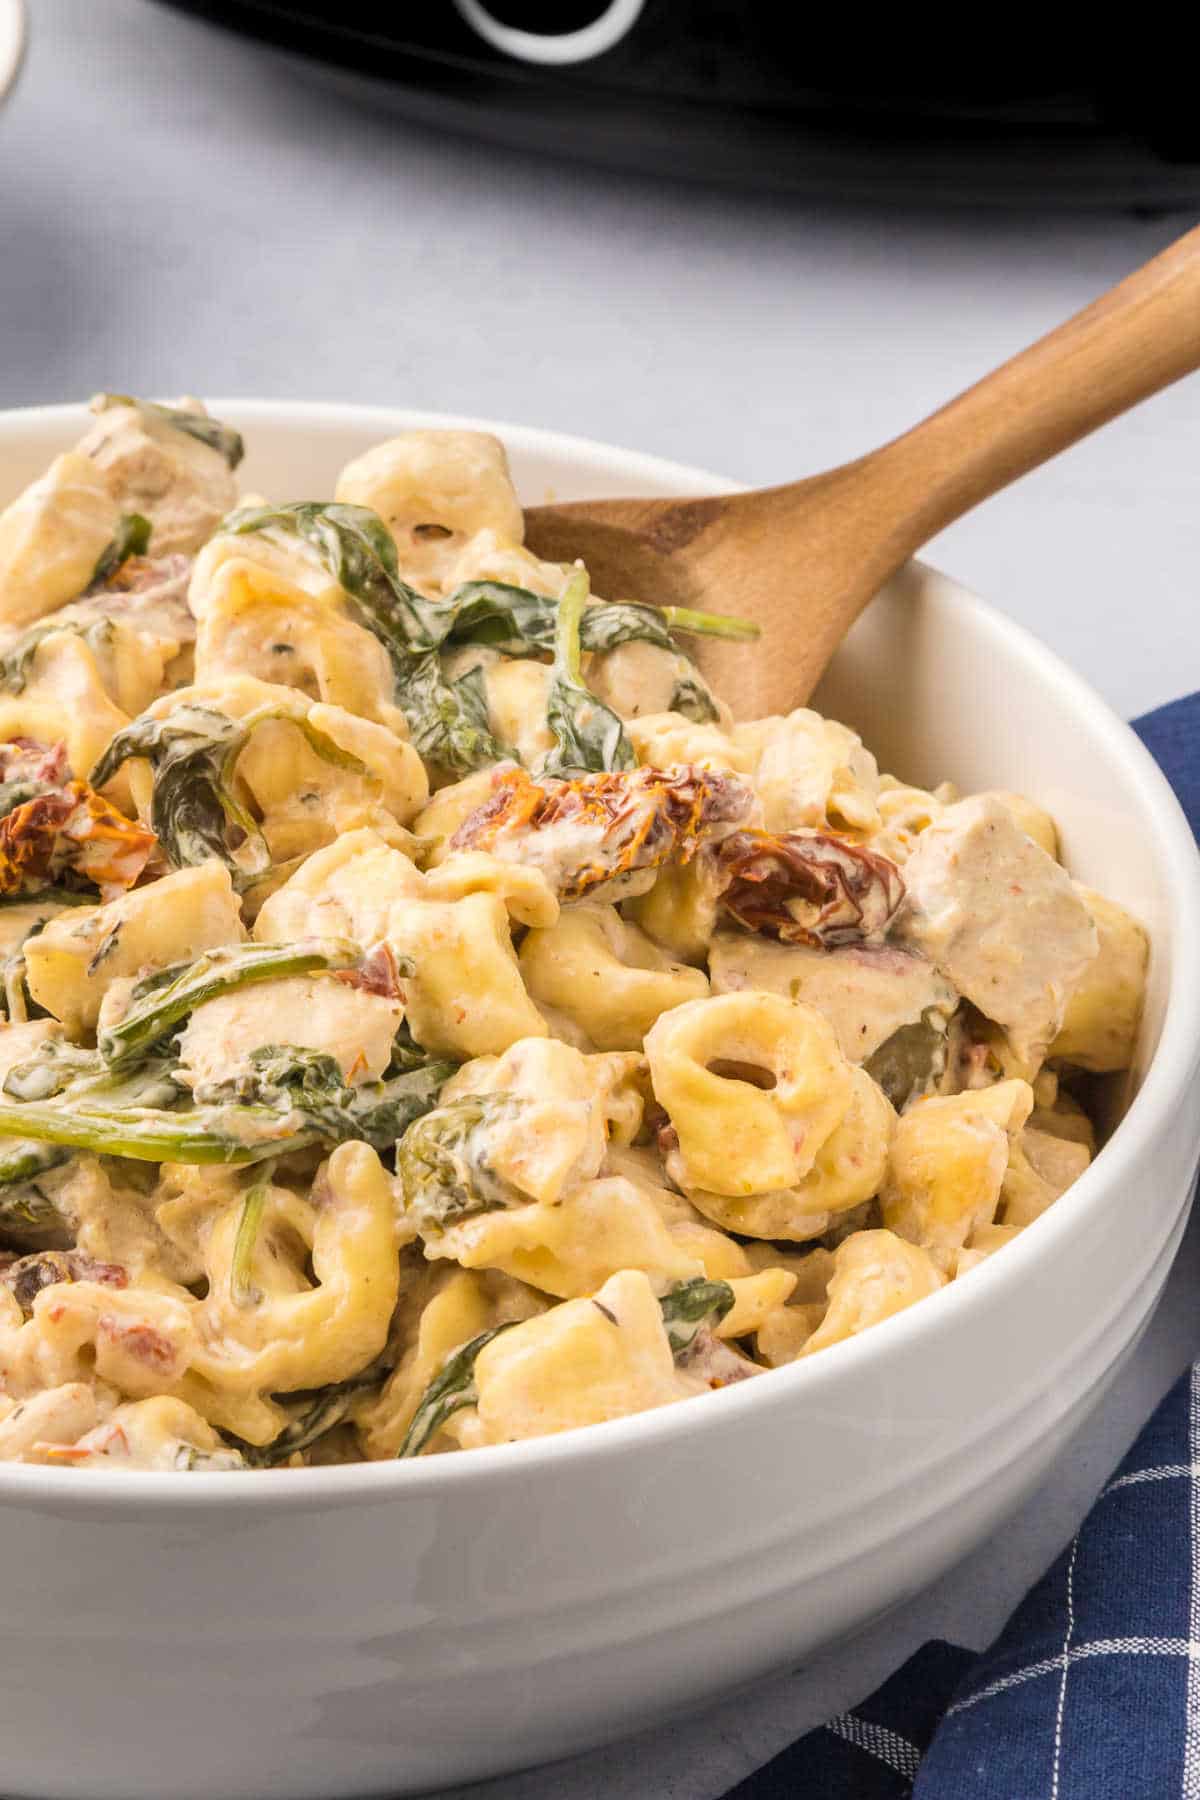 Tuscan chicken tortellini in a bowl with a wooden spoon.